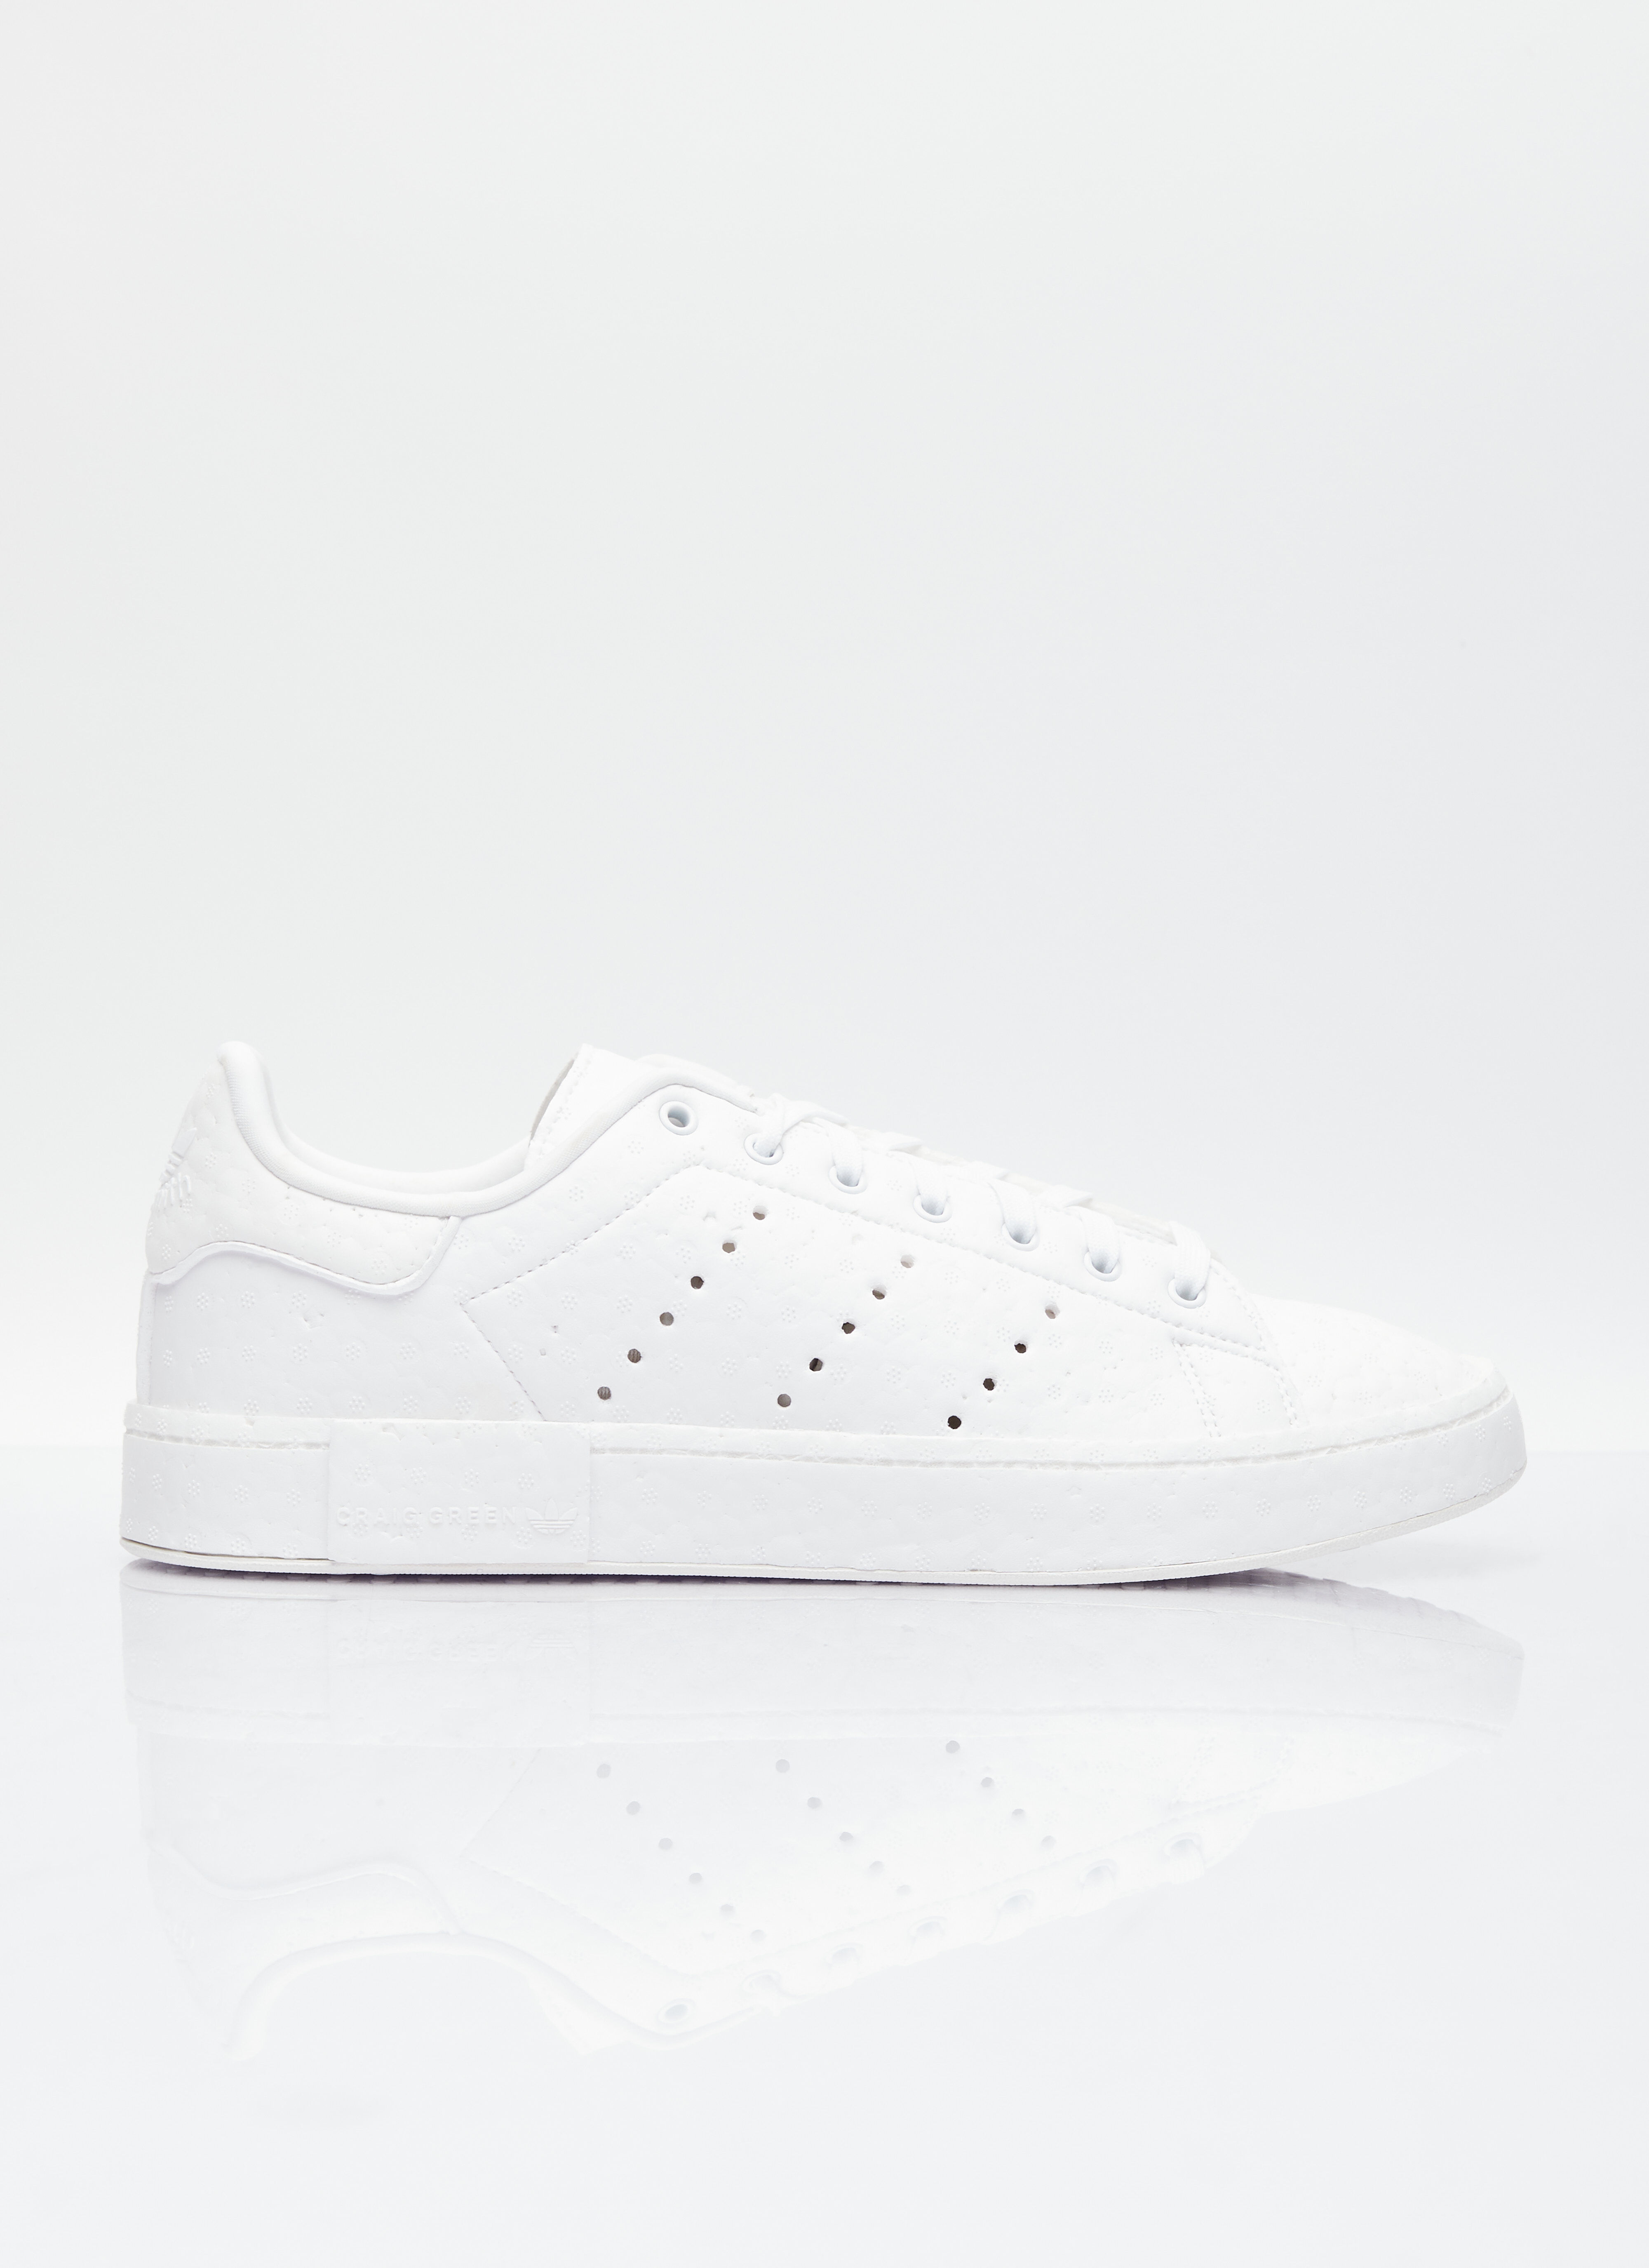 adidas by Craig Green Stan Smith Boost Sneakers Cream adg0153003